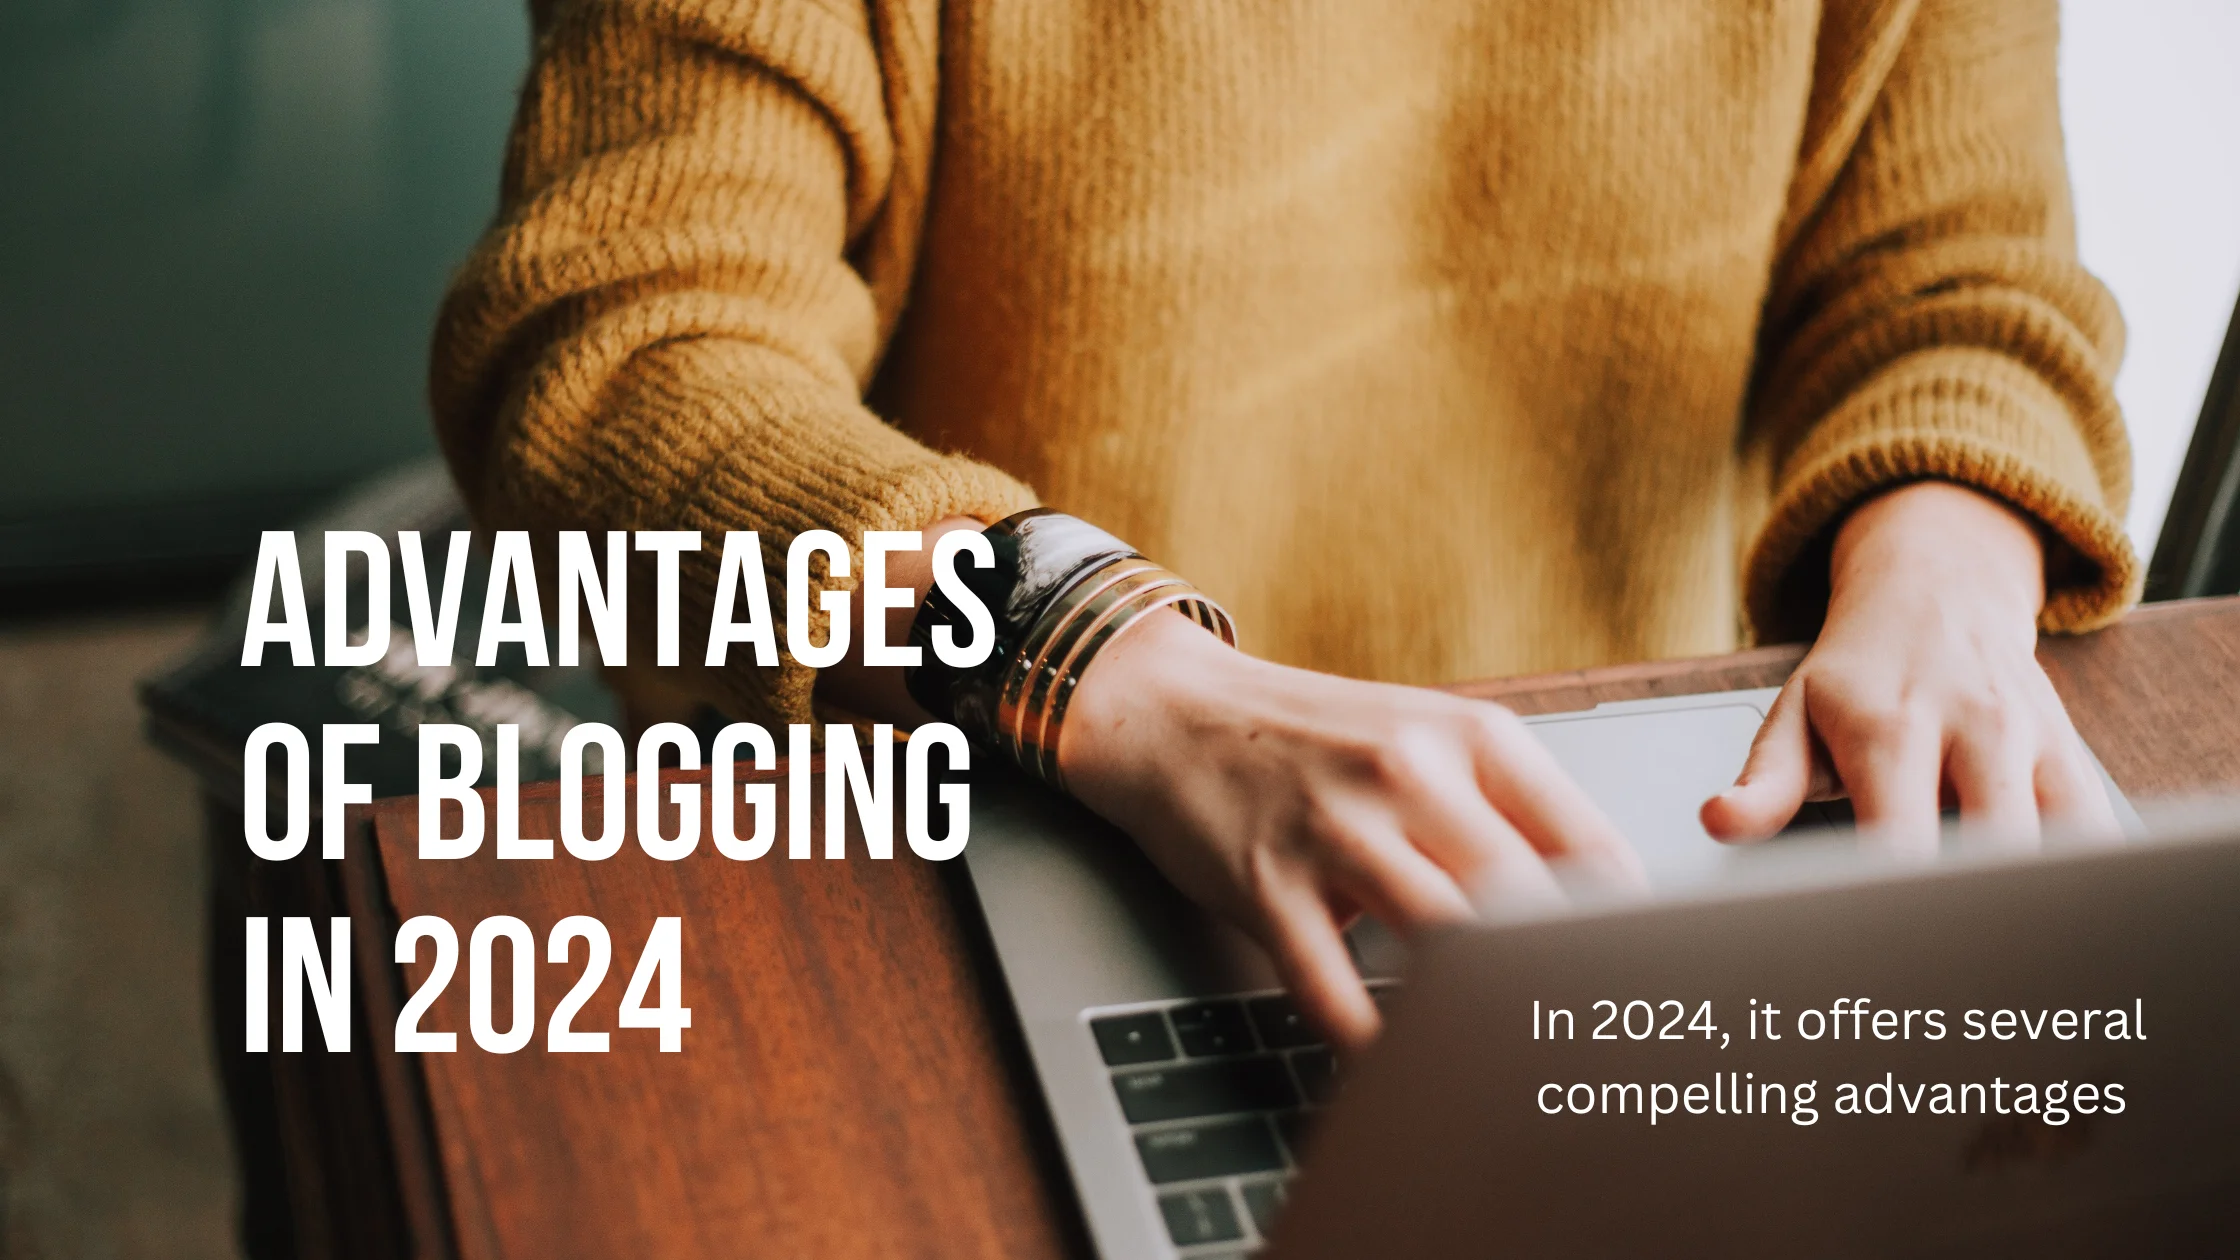 Advantages of Blogging in 2024